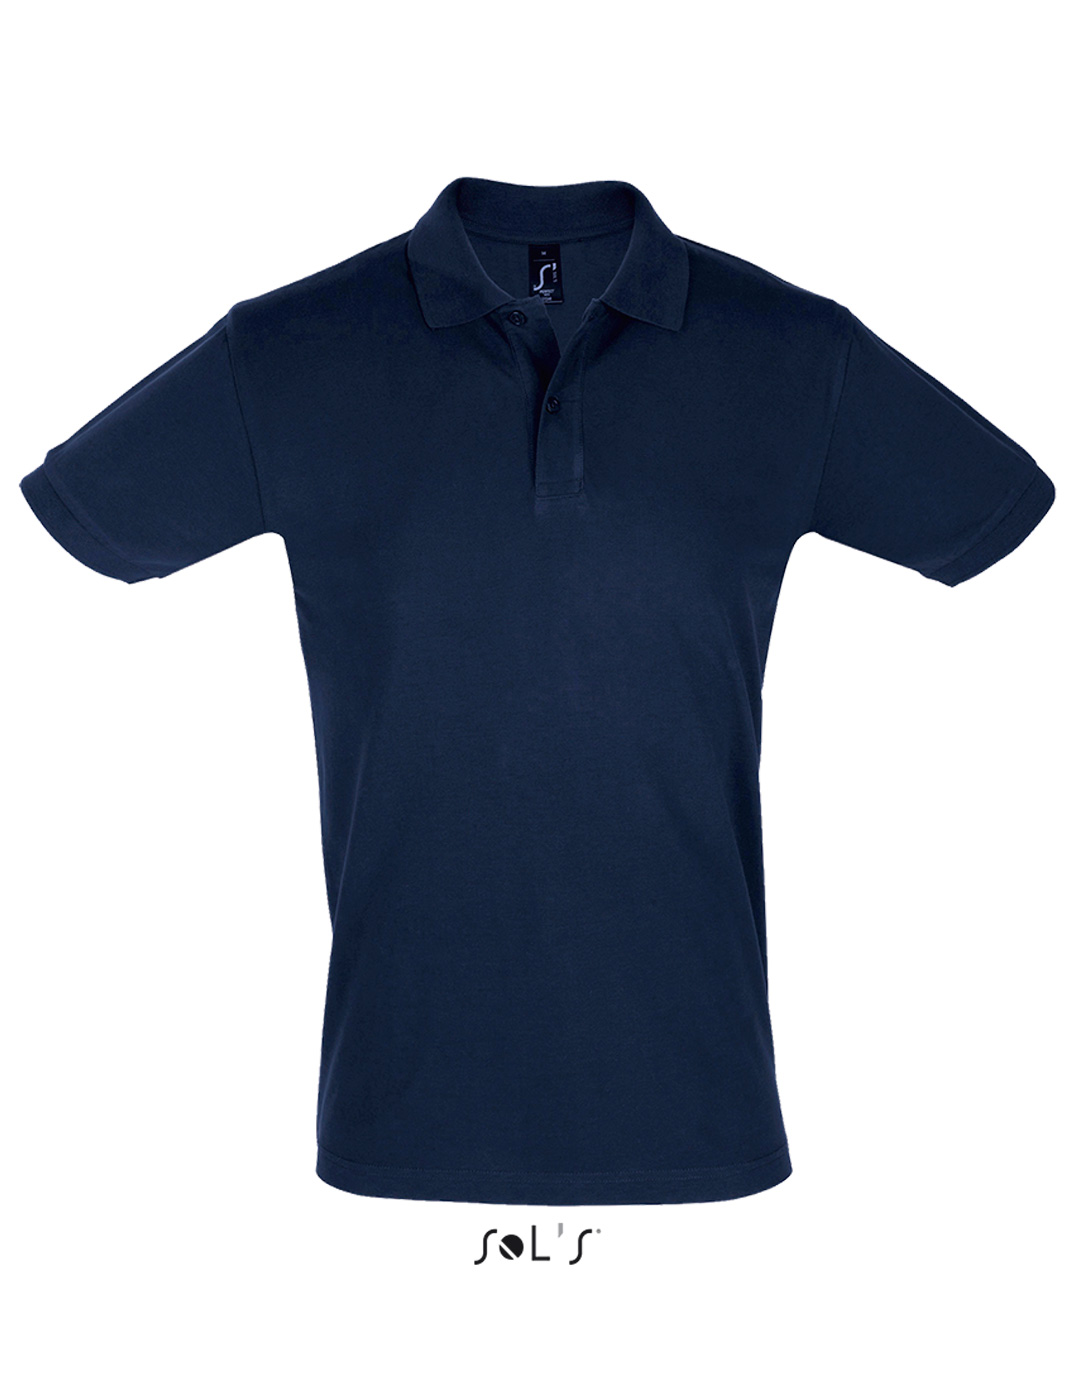 Perfect men 11346 french navy a